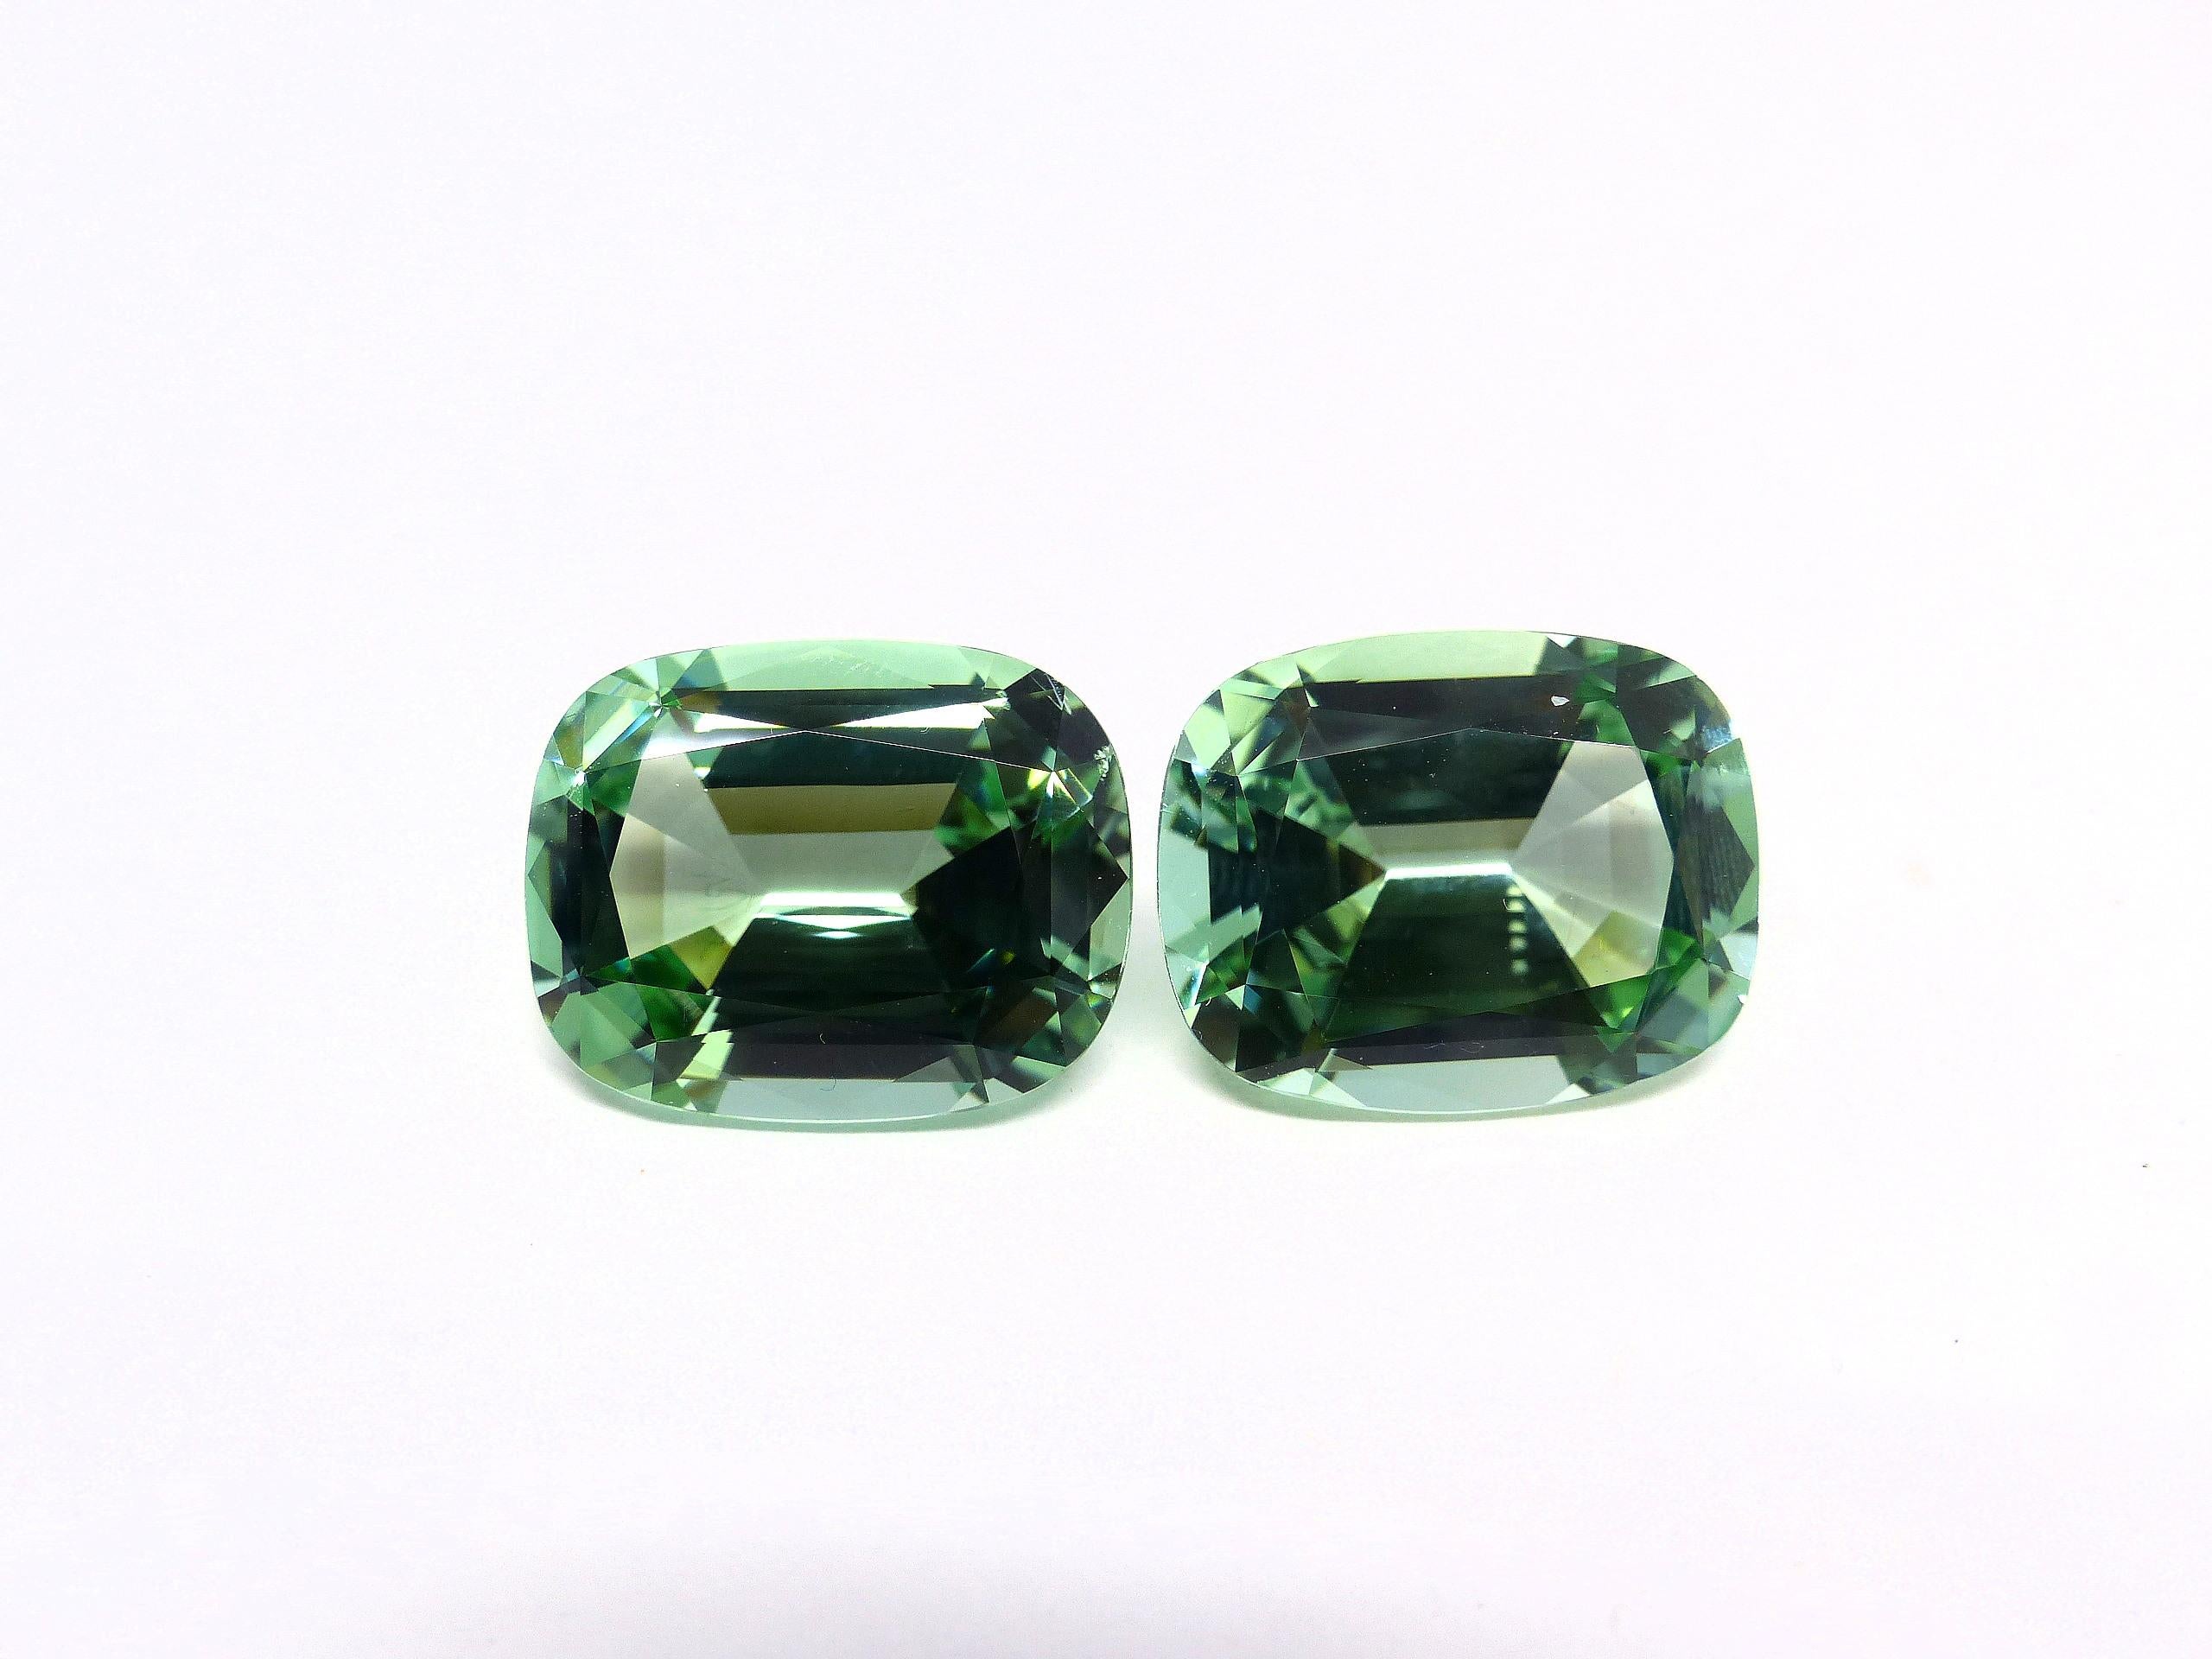 Thomas Leyser is renowned for his contemporary jewellery designs utilizing fine gemstones. He is also renowned for extraordinary loose stones.

2 Tourmalines, mintgreen/electric colour cut with large facettes in cushion shape 19x15mm, 9,5mm